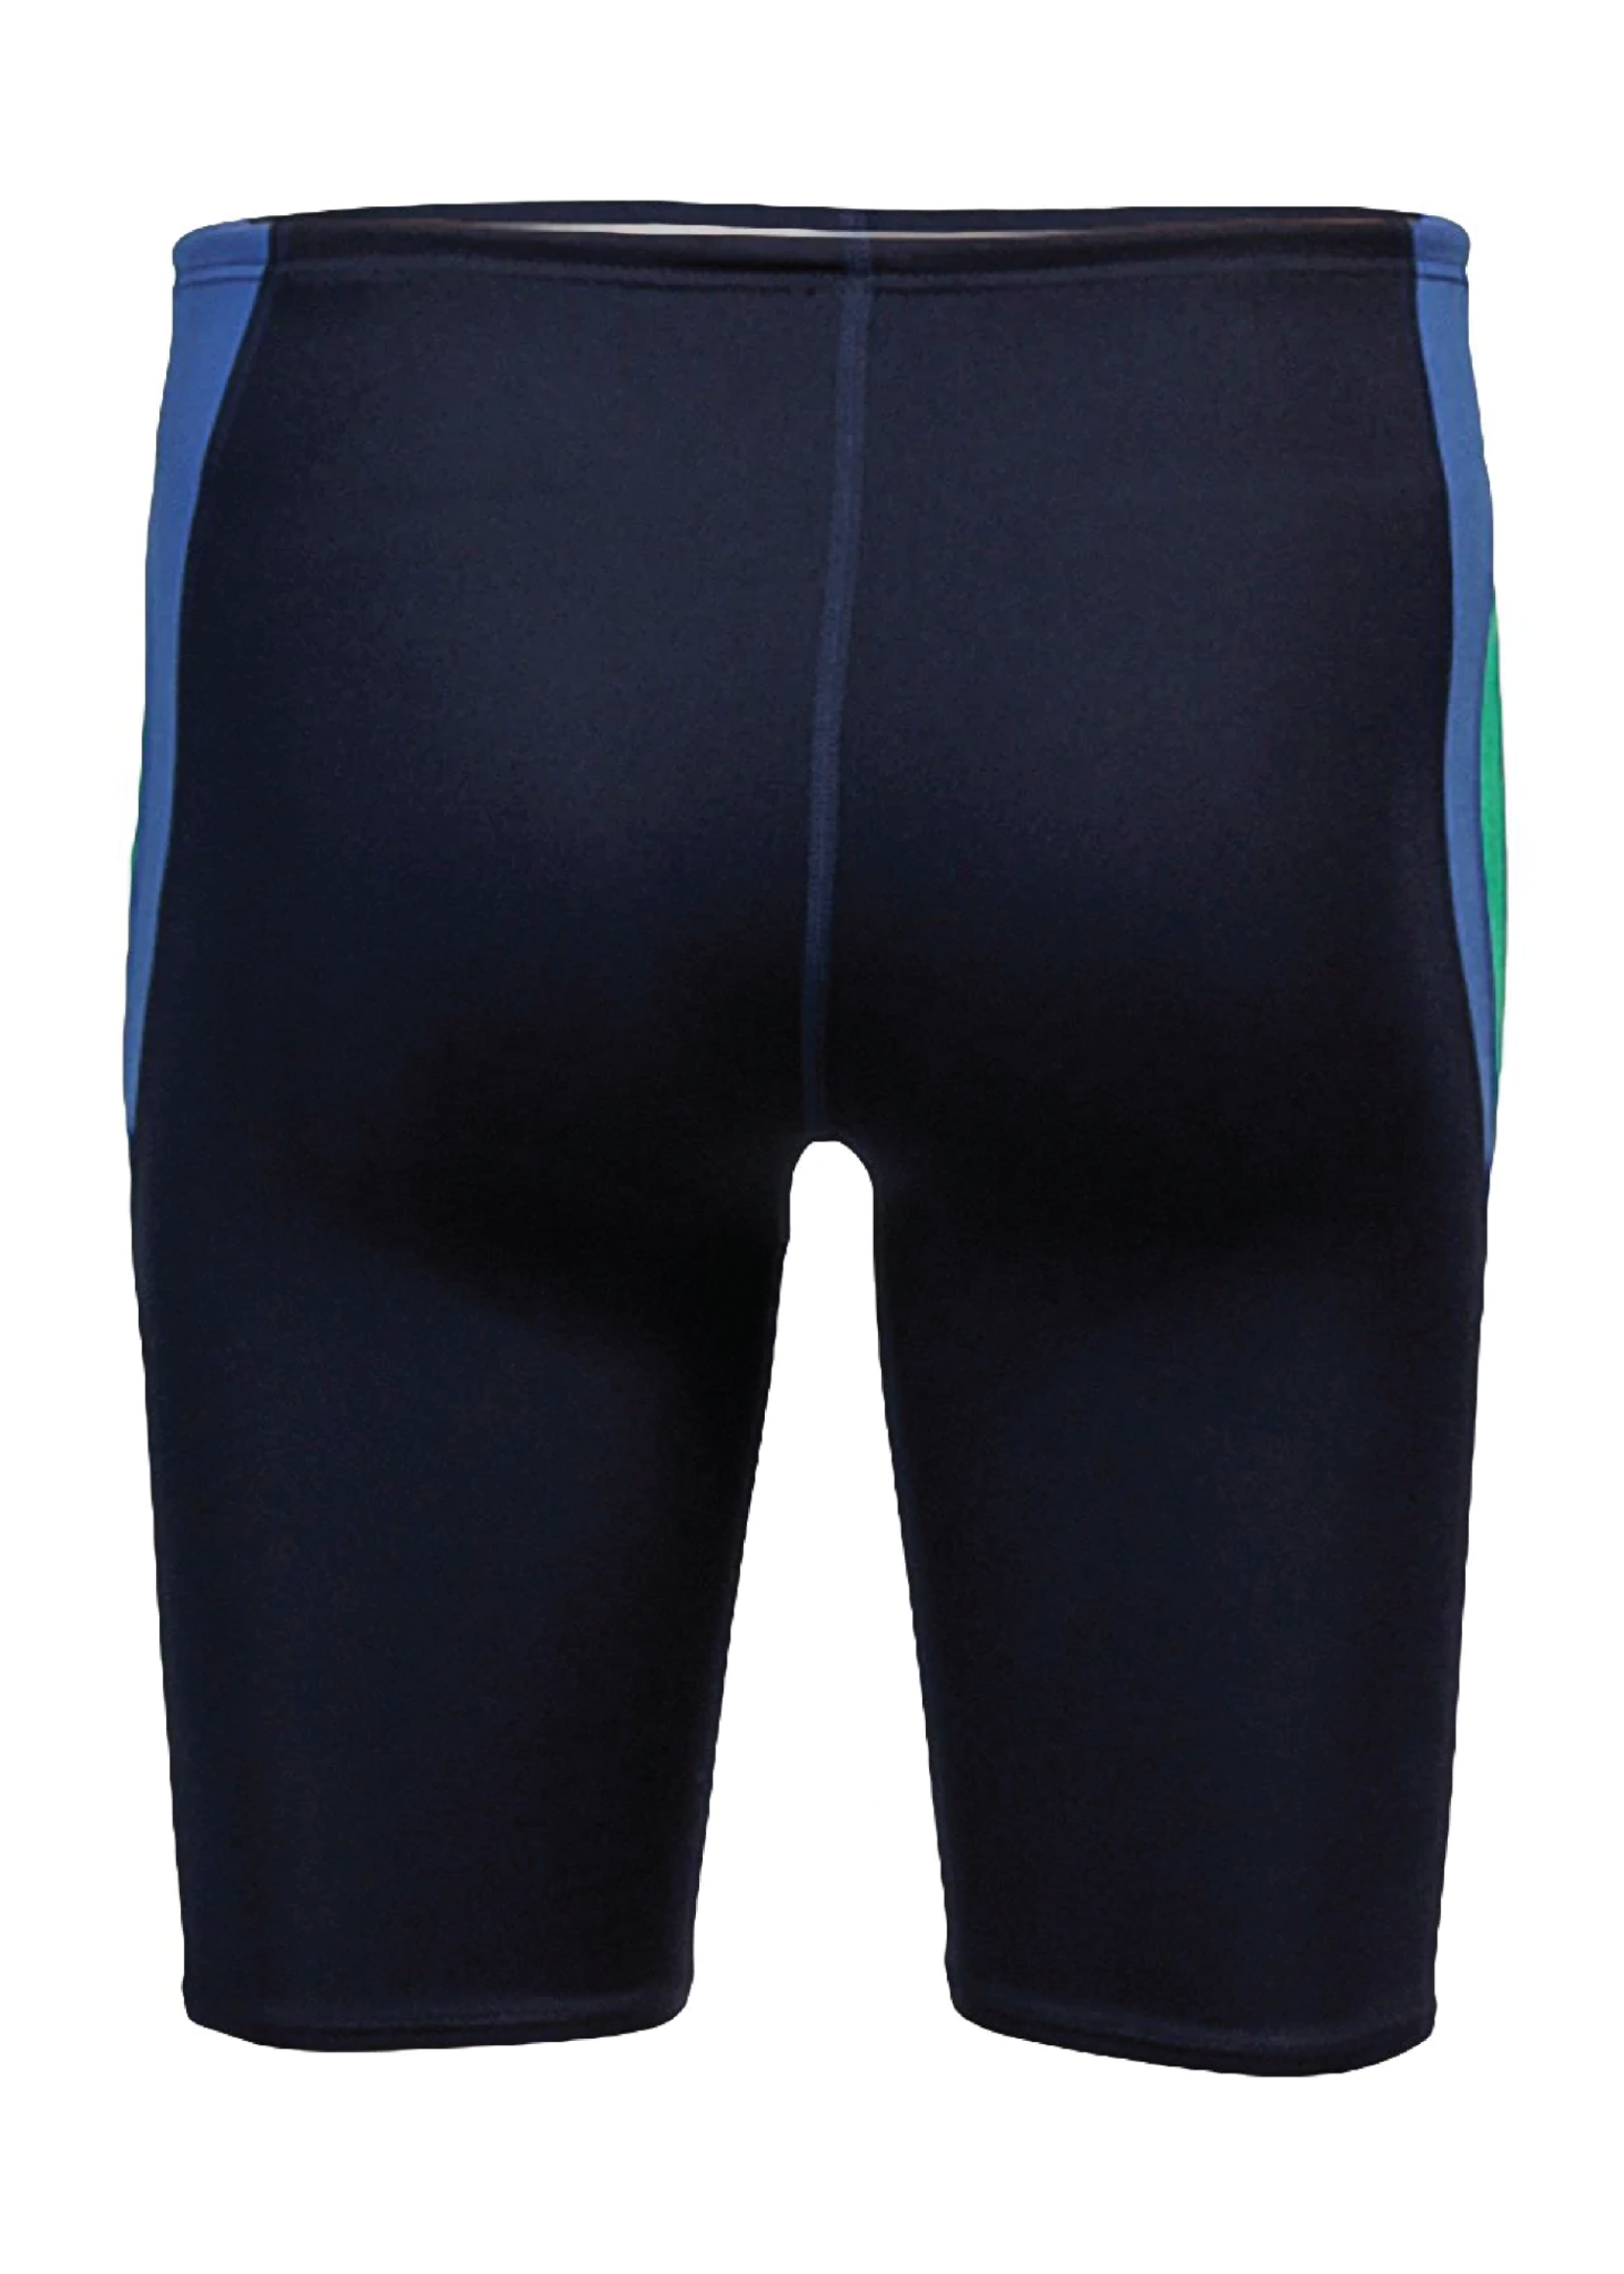 RELIANCE Colorblock Jammer 958 Navy/Blue/Green